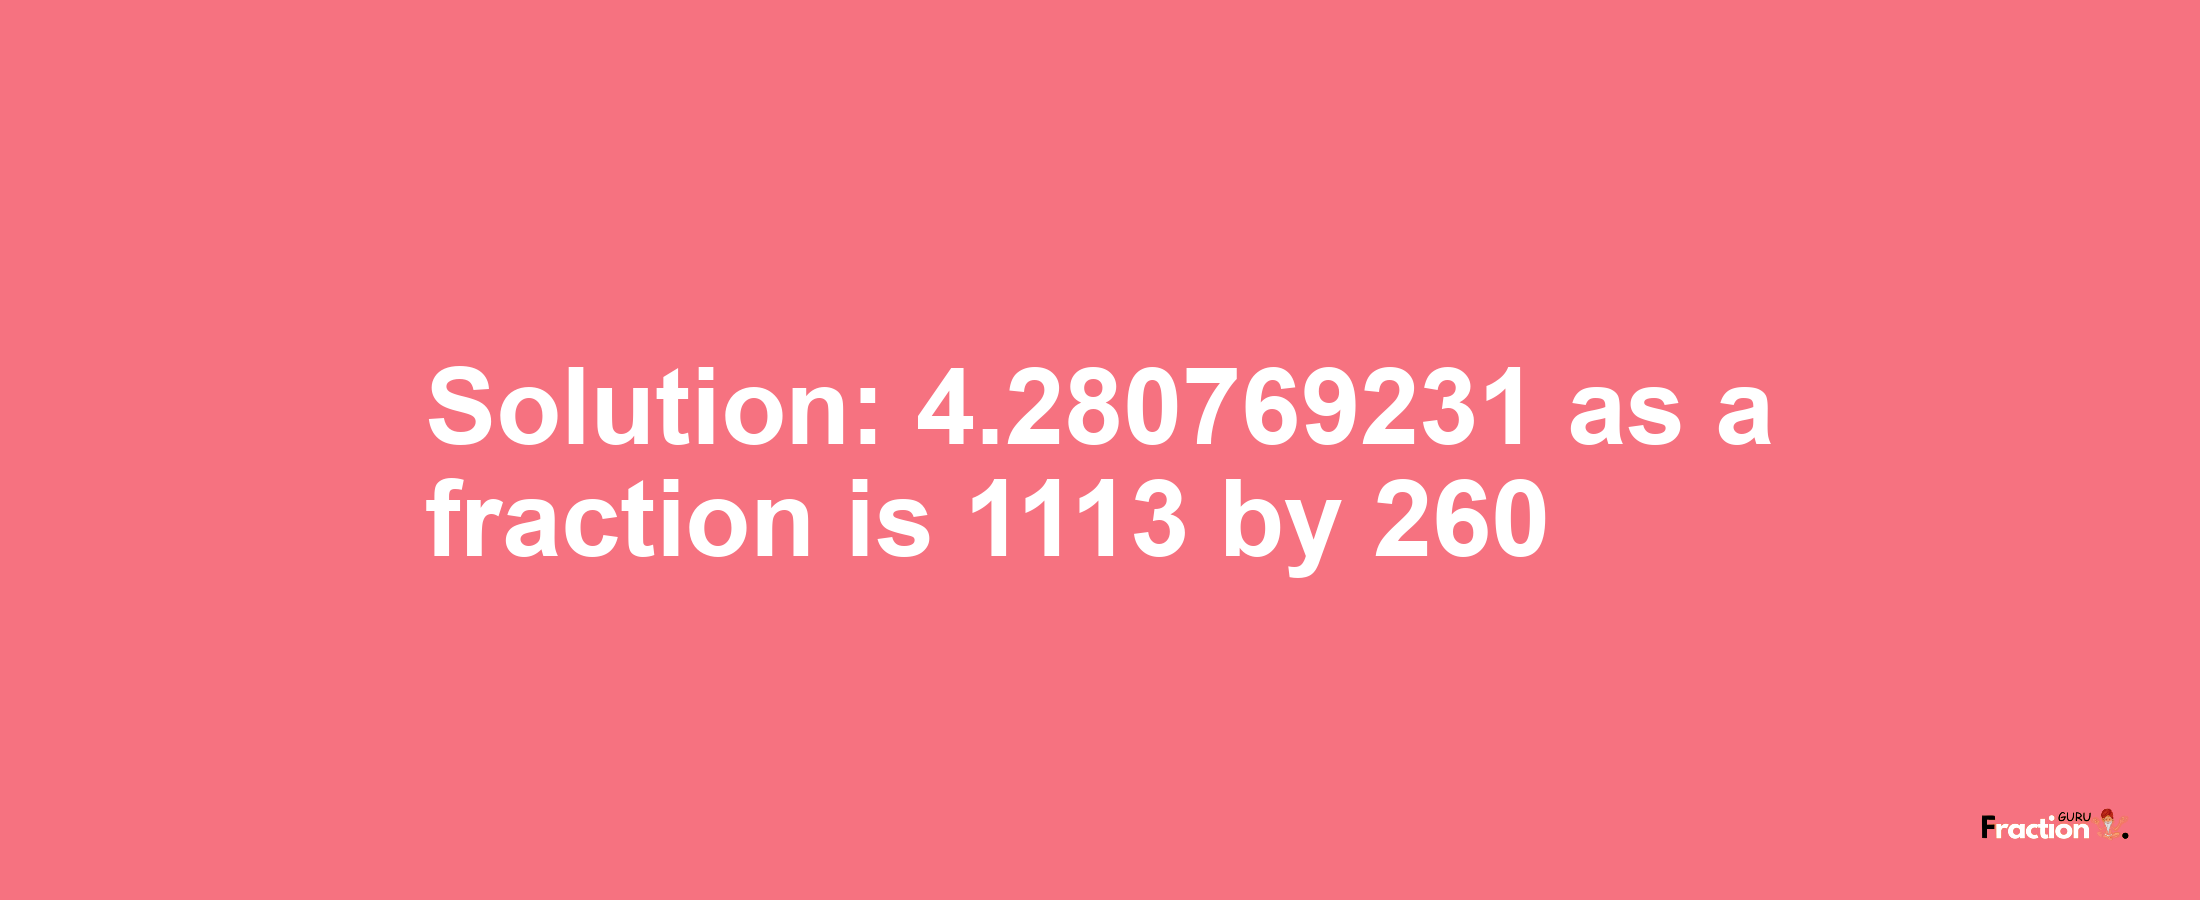 Solution:4.280769231 as a fraction is 1113/260